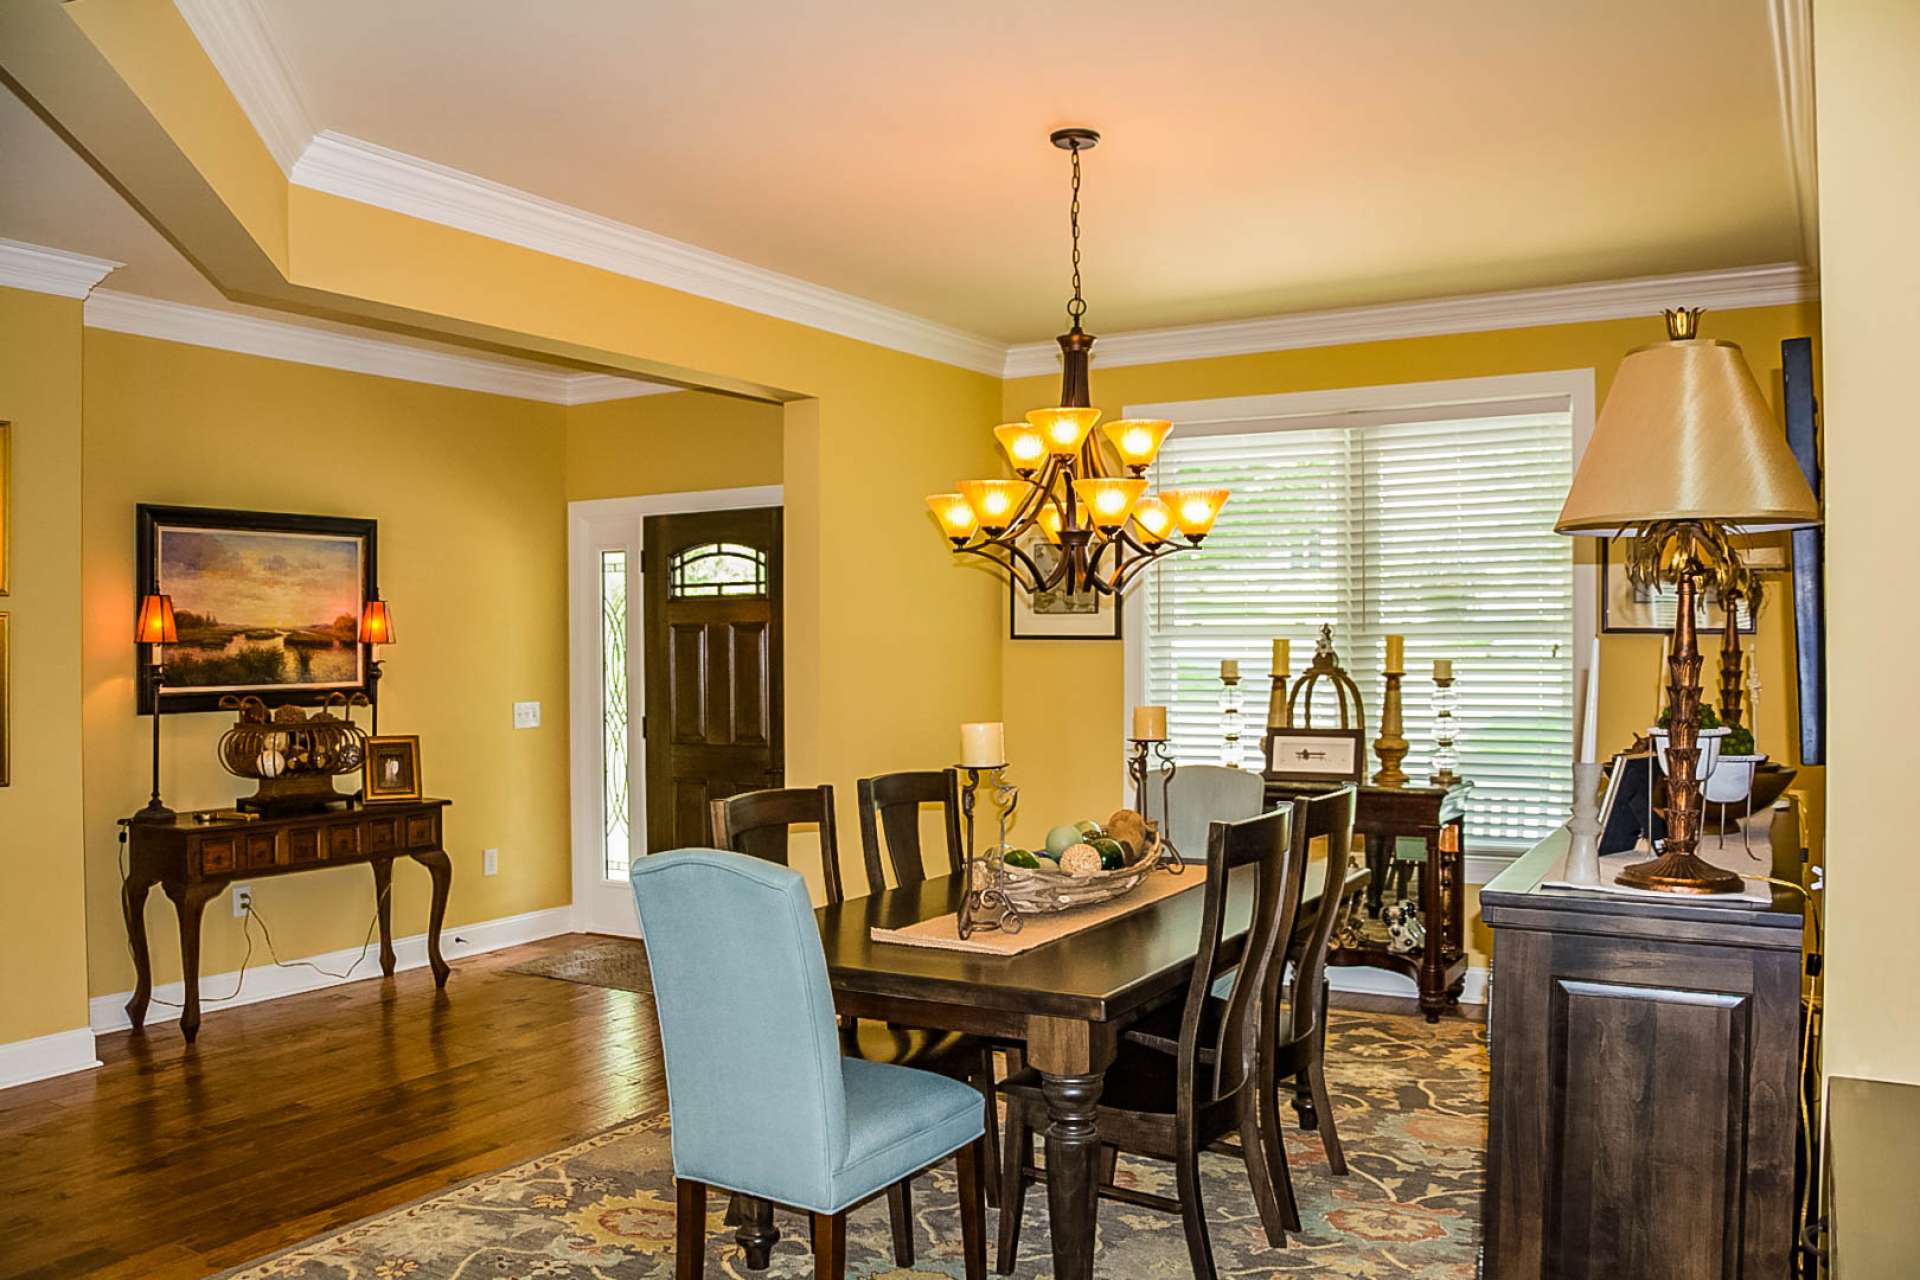 Your dinner guests will feel like royalty in this beautiful formal dining area.